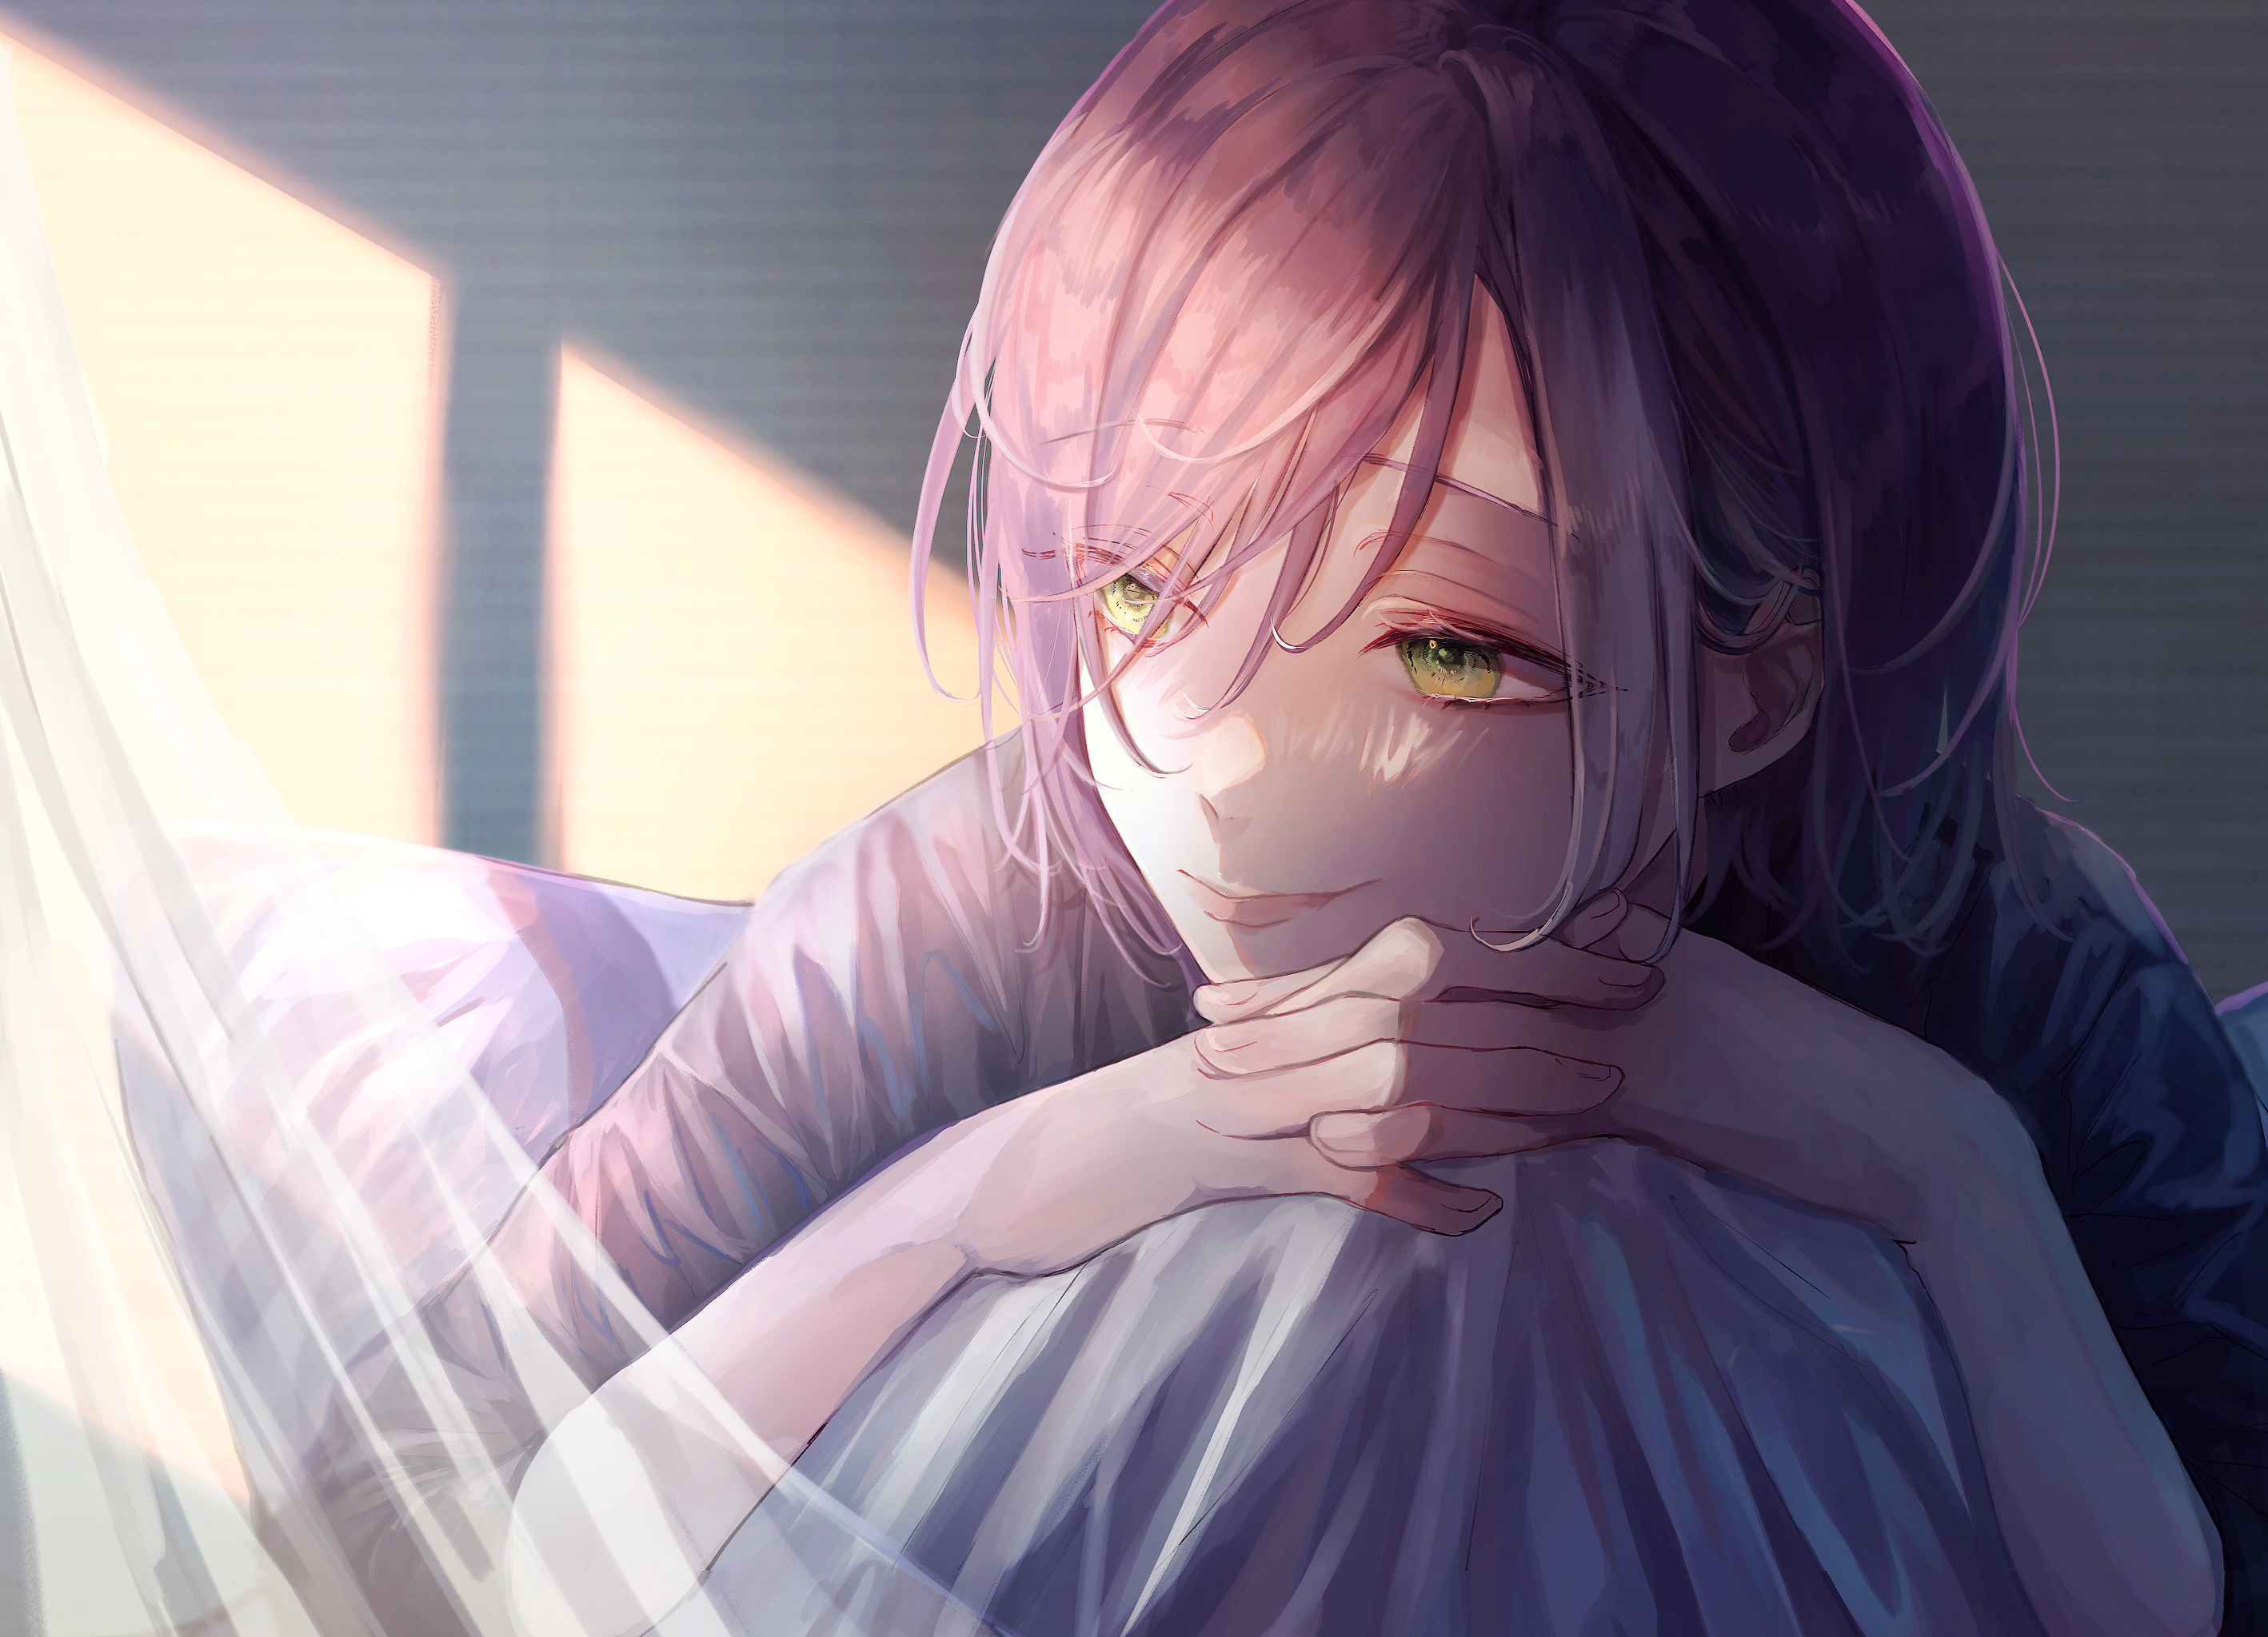 Anime Anime Girls Green Eyes Pink Hair Looking Away Light Effects In Bed Curtains Short Hair 2836x2047